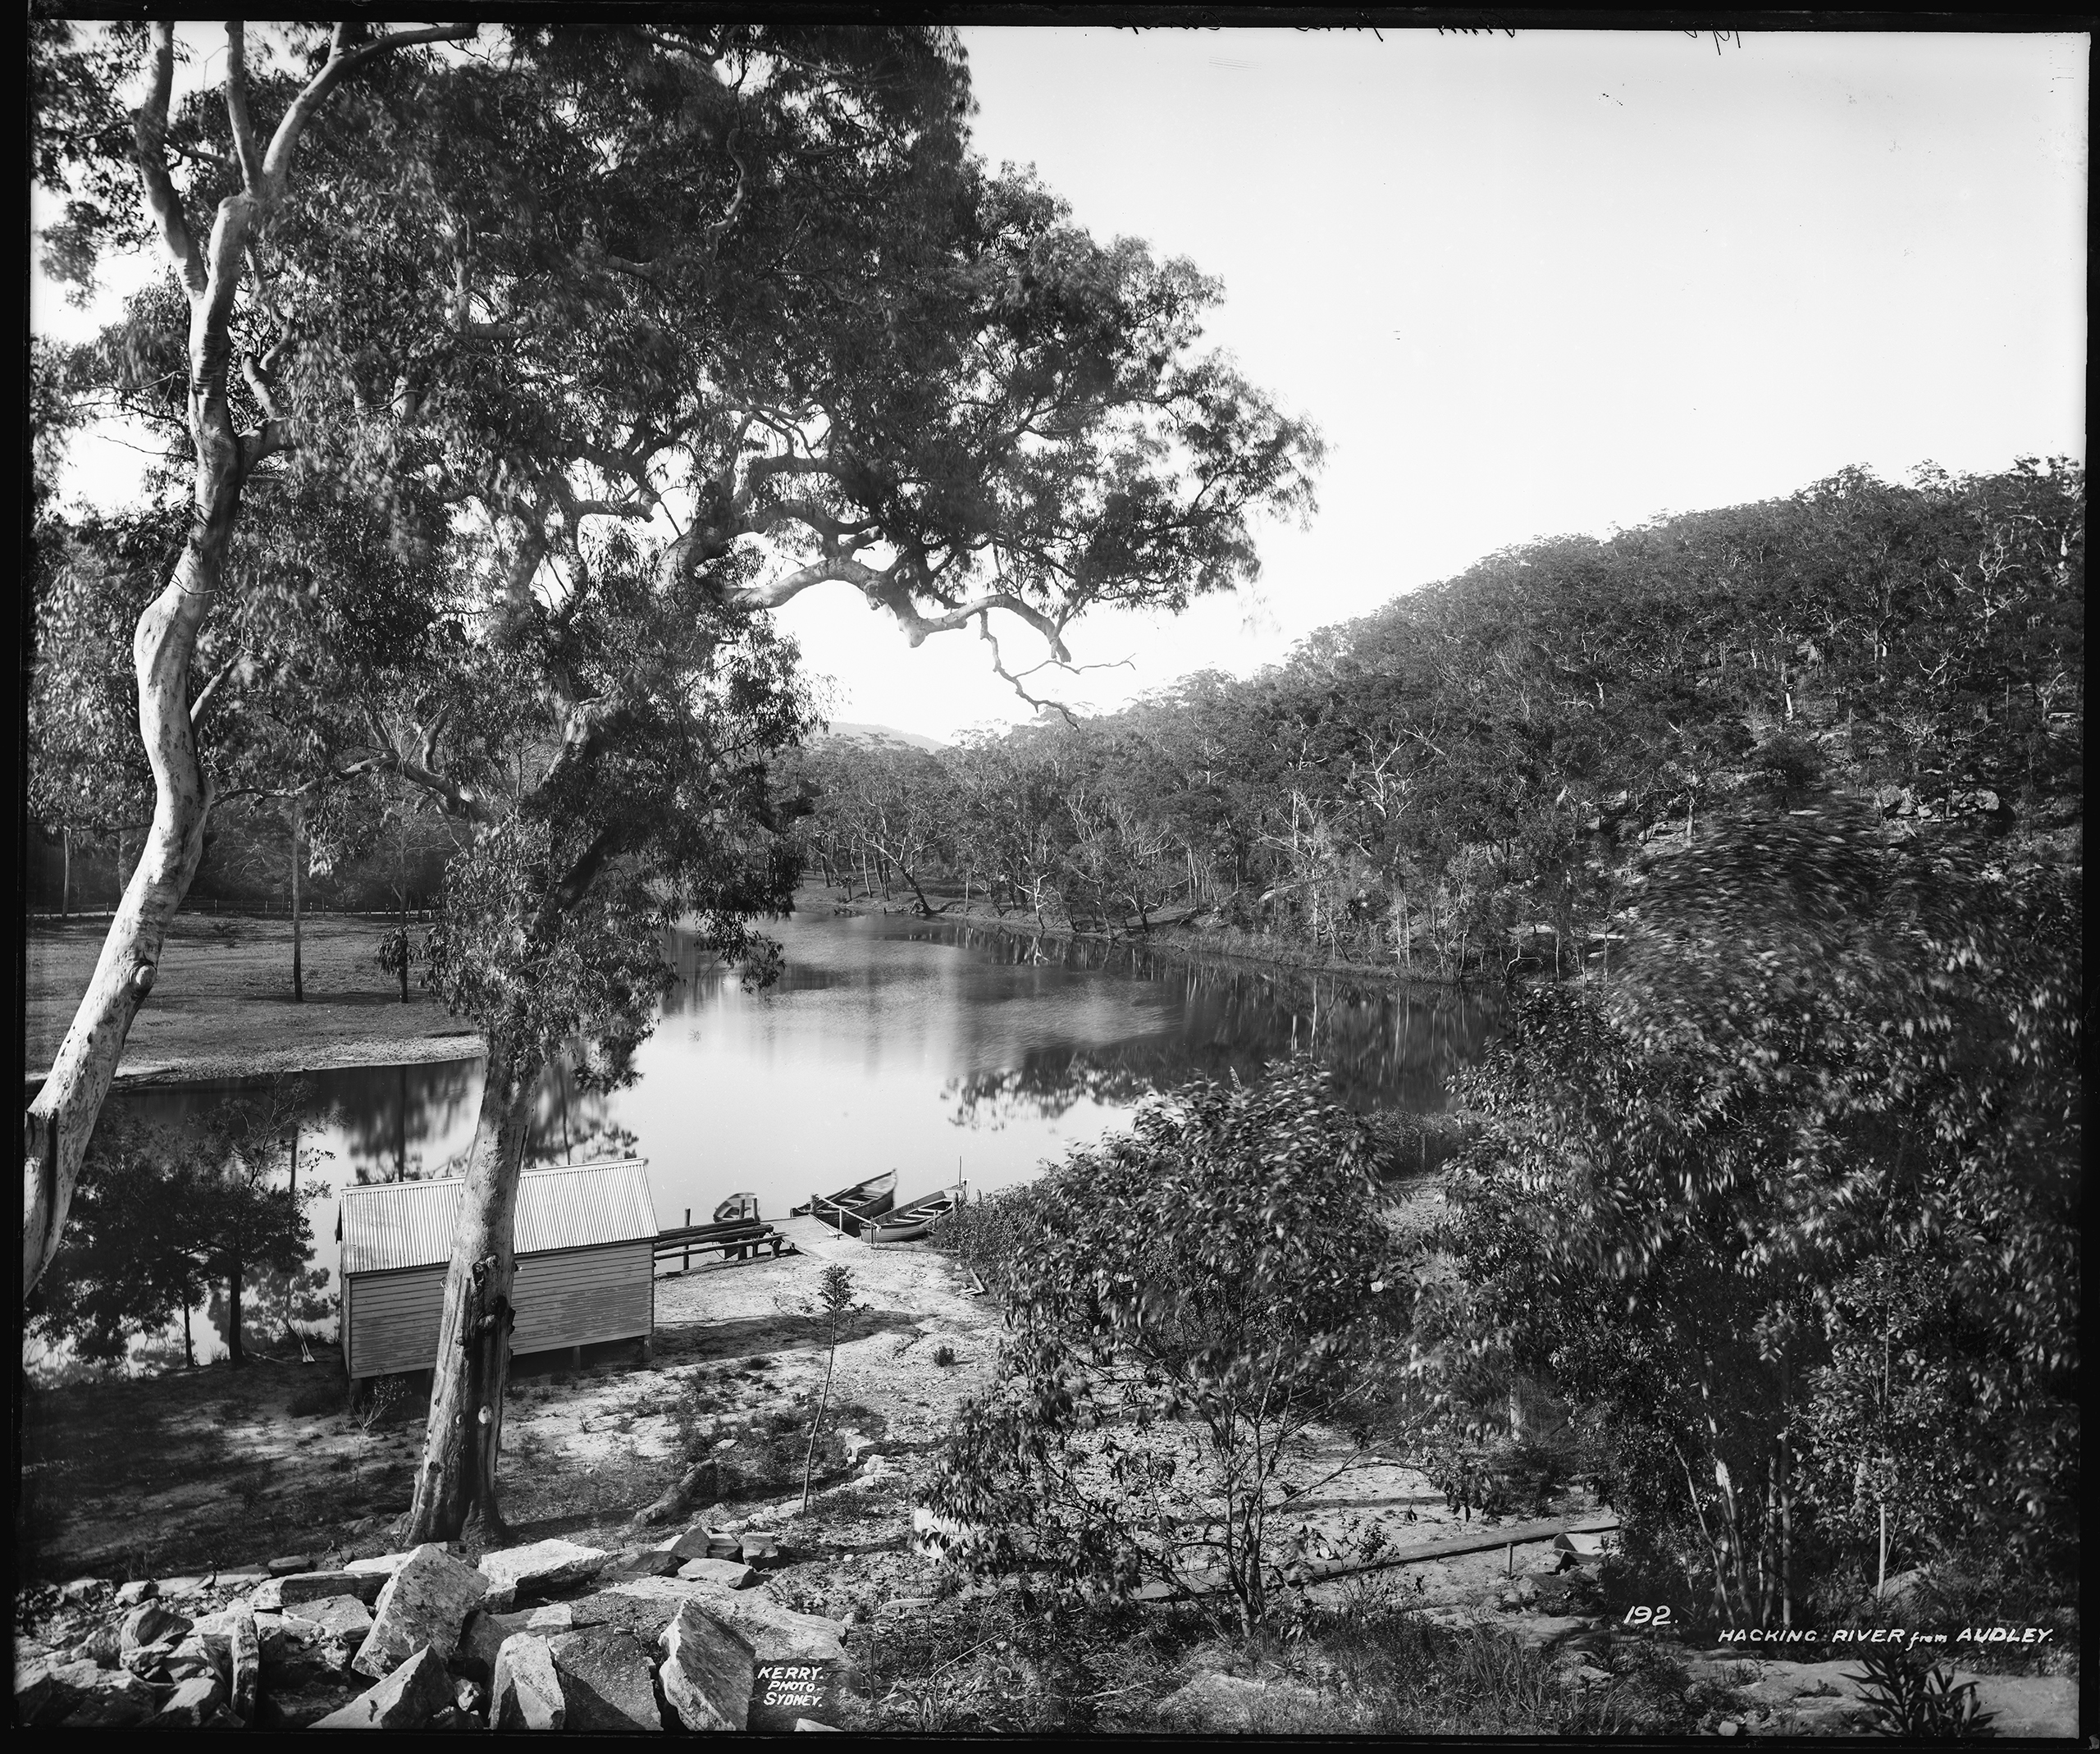 'Hacking River from Audley' glass negative by Kerry and Co